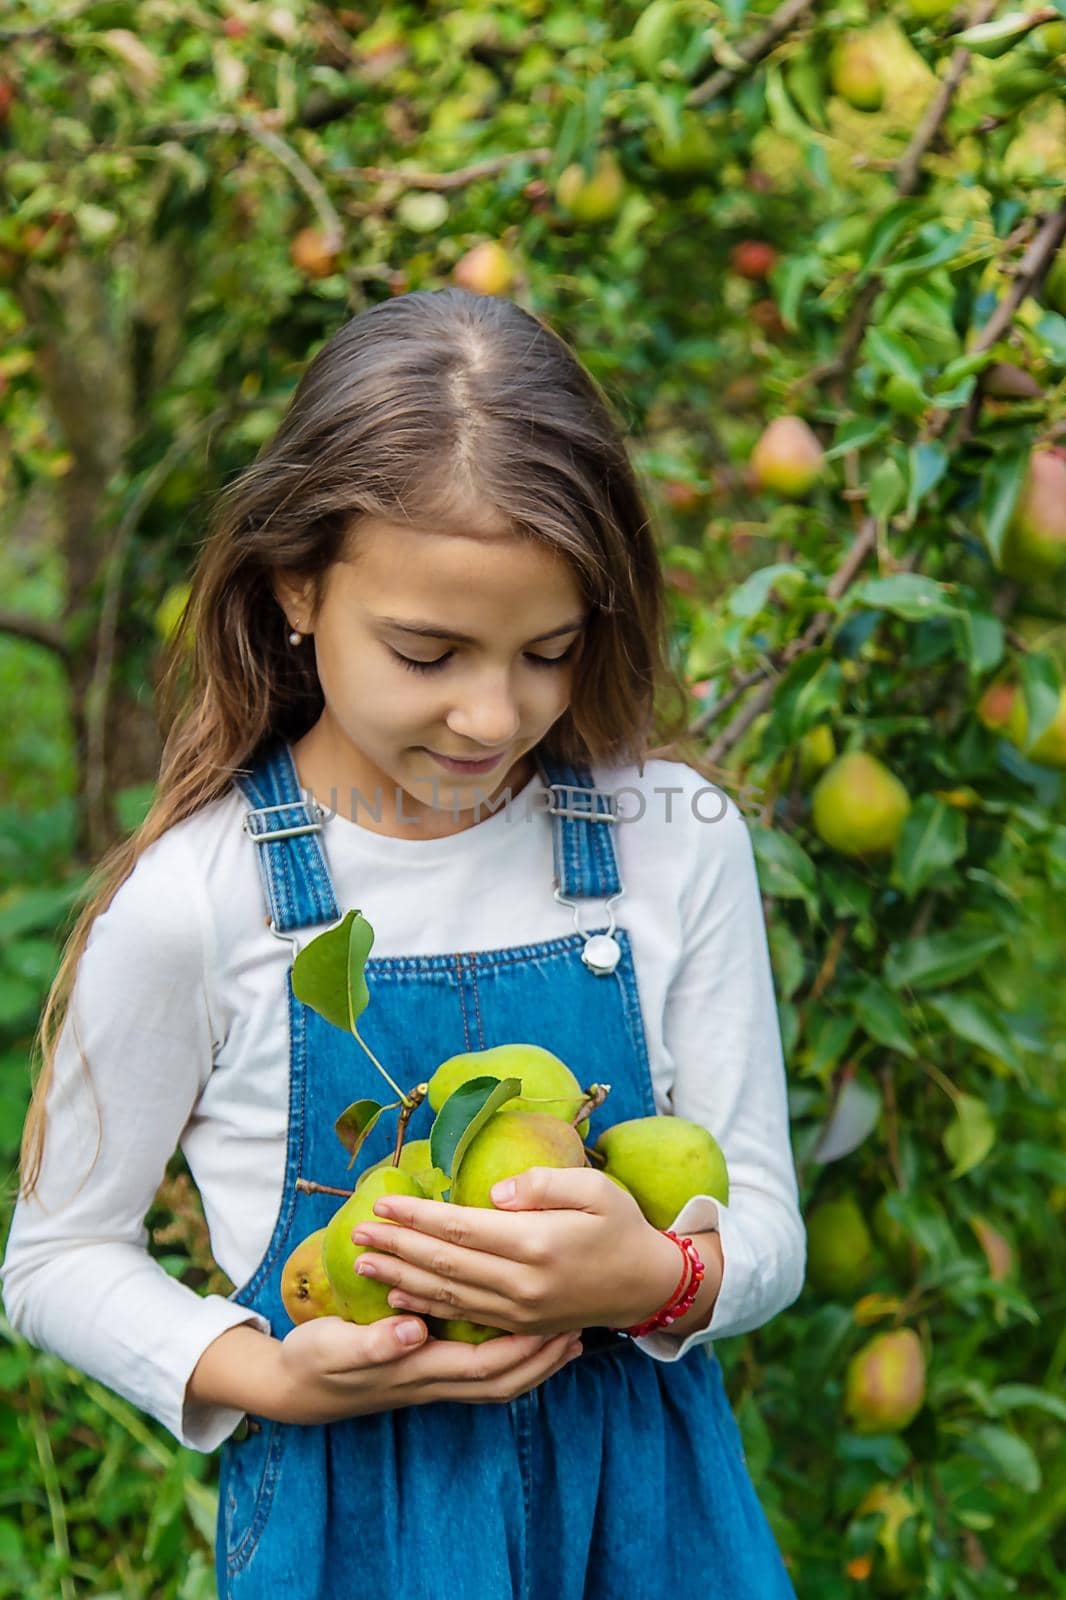 A child harvests pears in the garden. Selective focus. by yanadjana